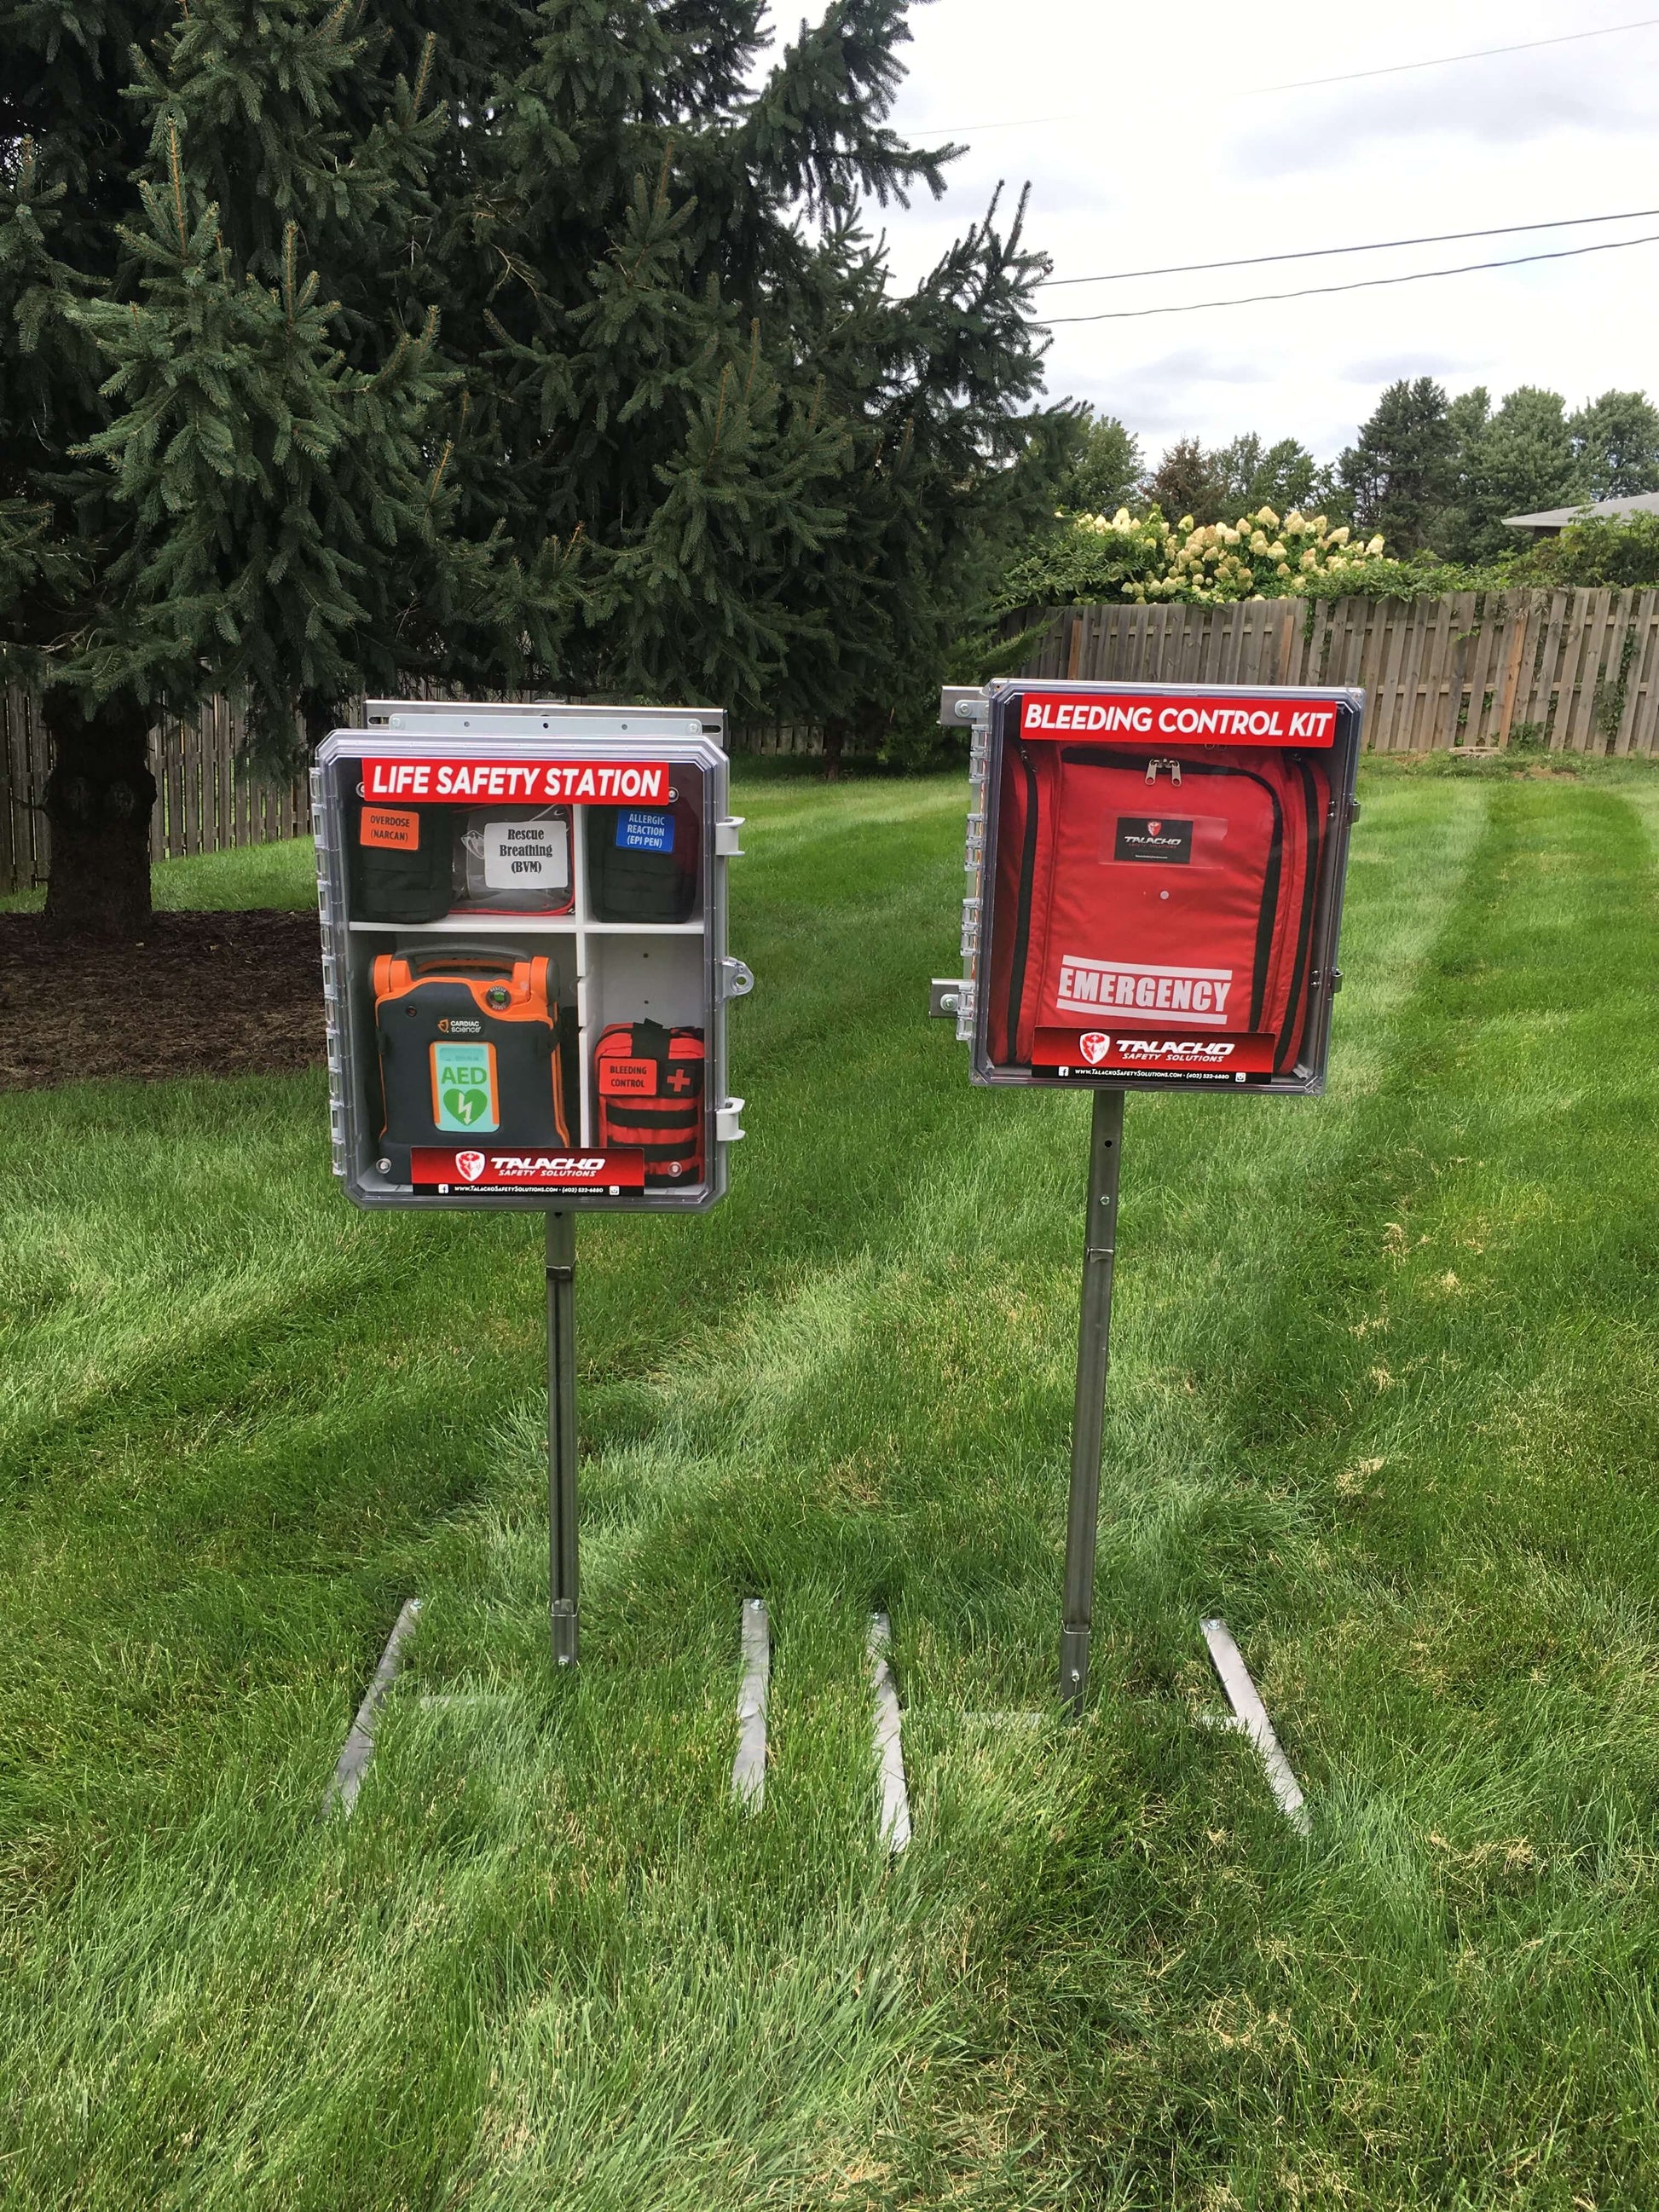 Emergency Equipment Platform by Talacko Safety Solutions is powder coated in Emergency red and allows our Life Safety Station and our King Bleeding Control Kit to be placed anywhere indoors or out. This is a perfect combination for your music festival, county fair or outdoor event.